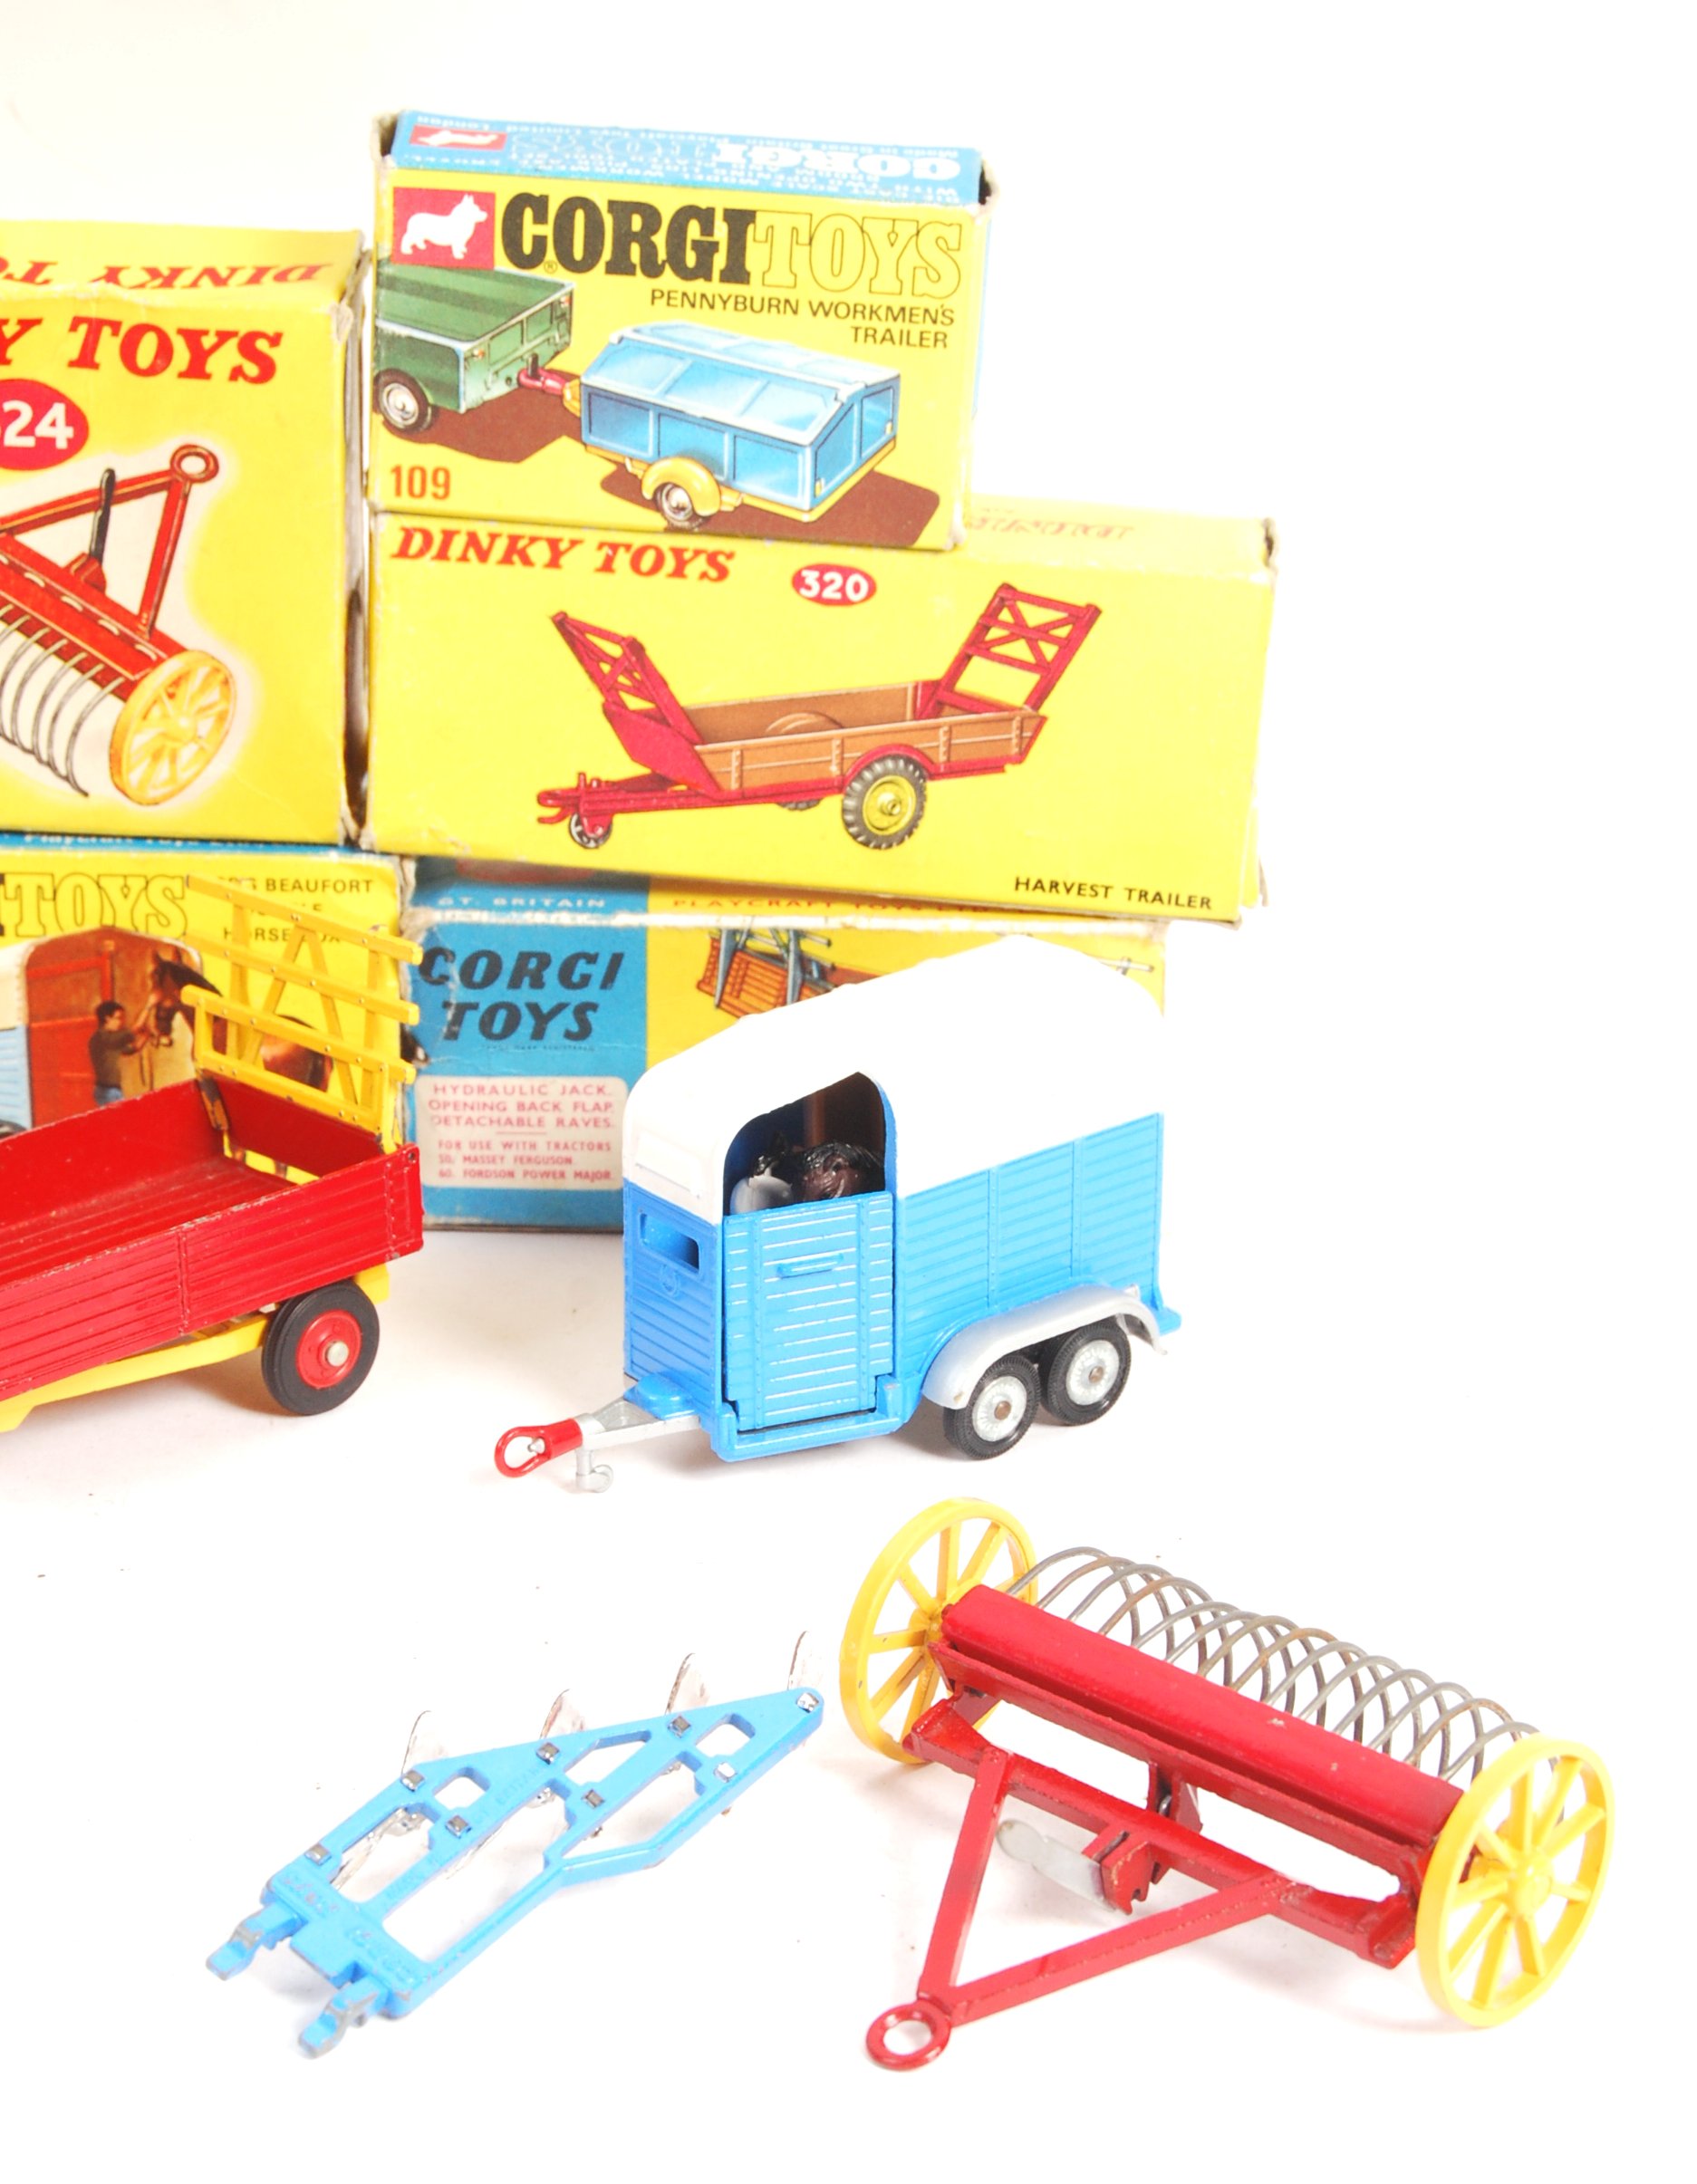 COLLECTION OF VINTAGE DINKY TOYS & CORGI TOYS DIECAST FARM MODELS - Image 4 of 5